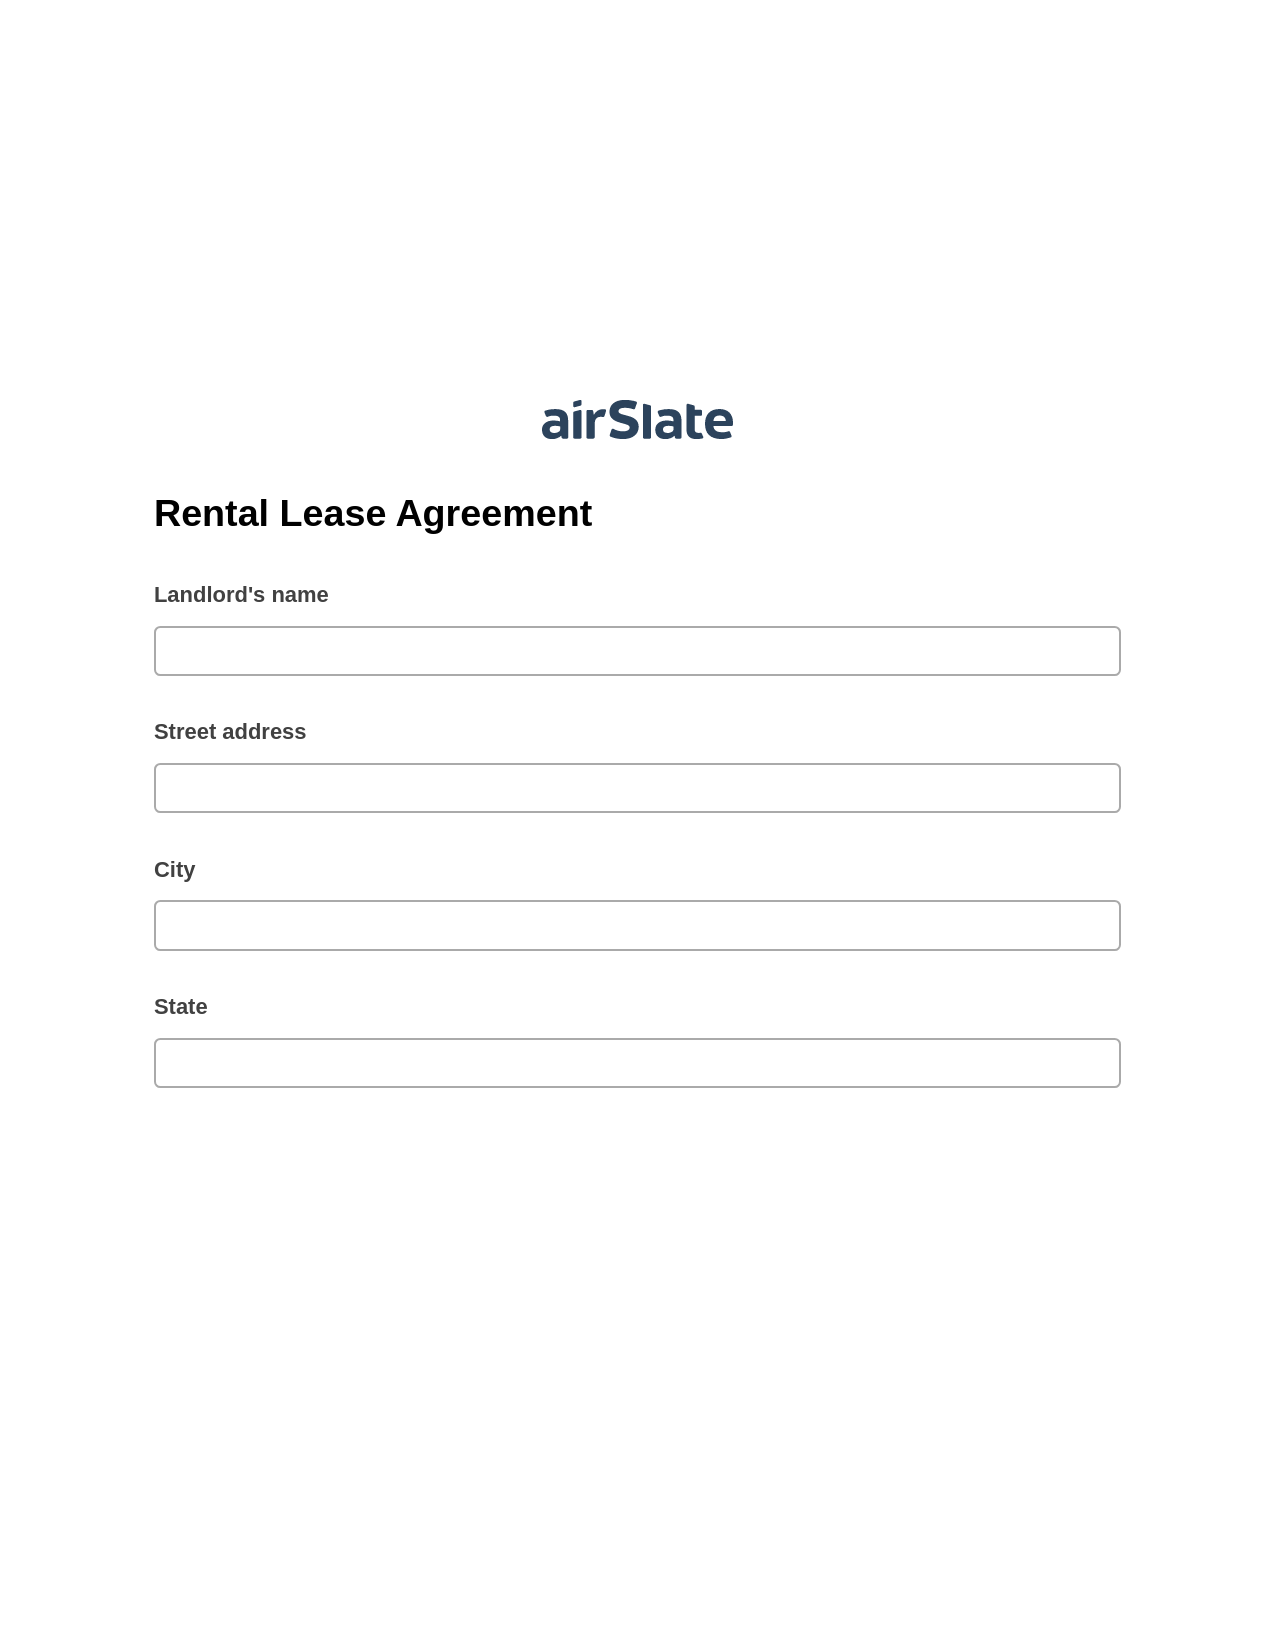 Rental Lease Agreement Pre-fill from Google Sheet Dropdown Options Bot, Update MS Dynamics 365 Record Bot, Slack Two-Way Binding Bot